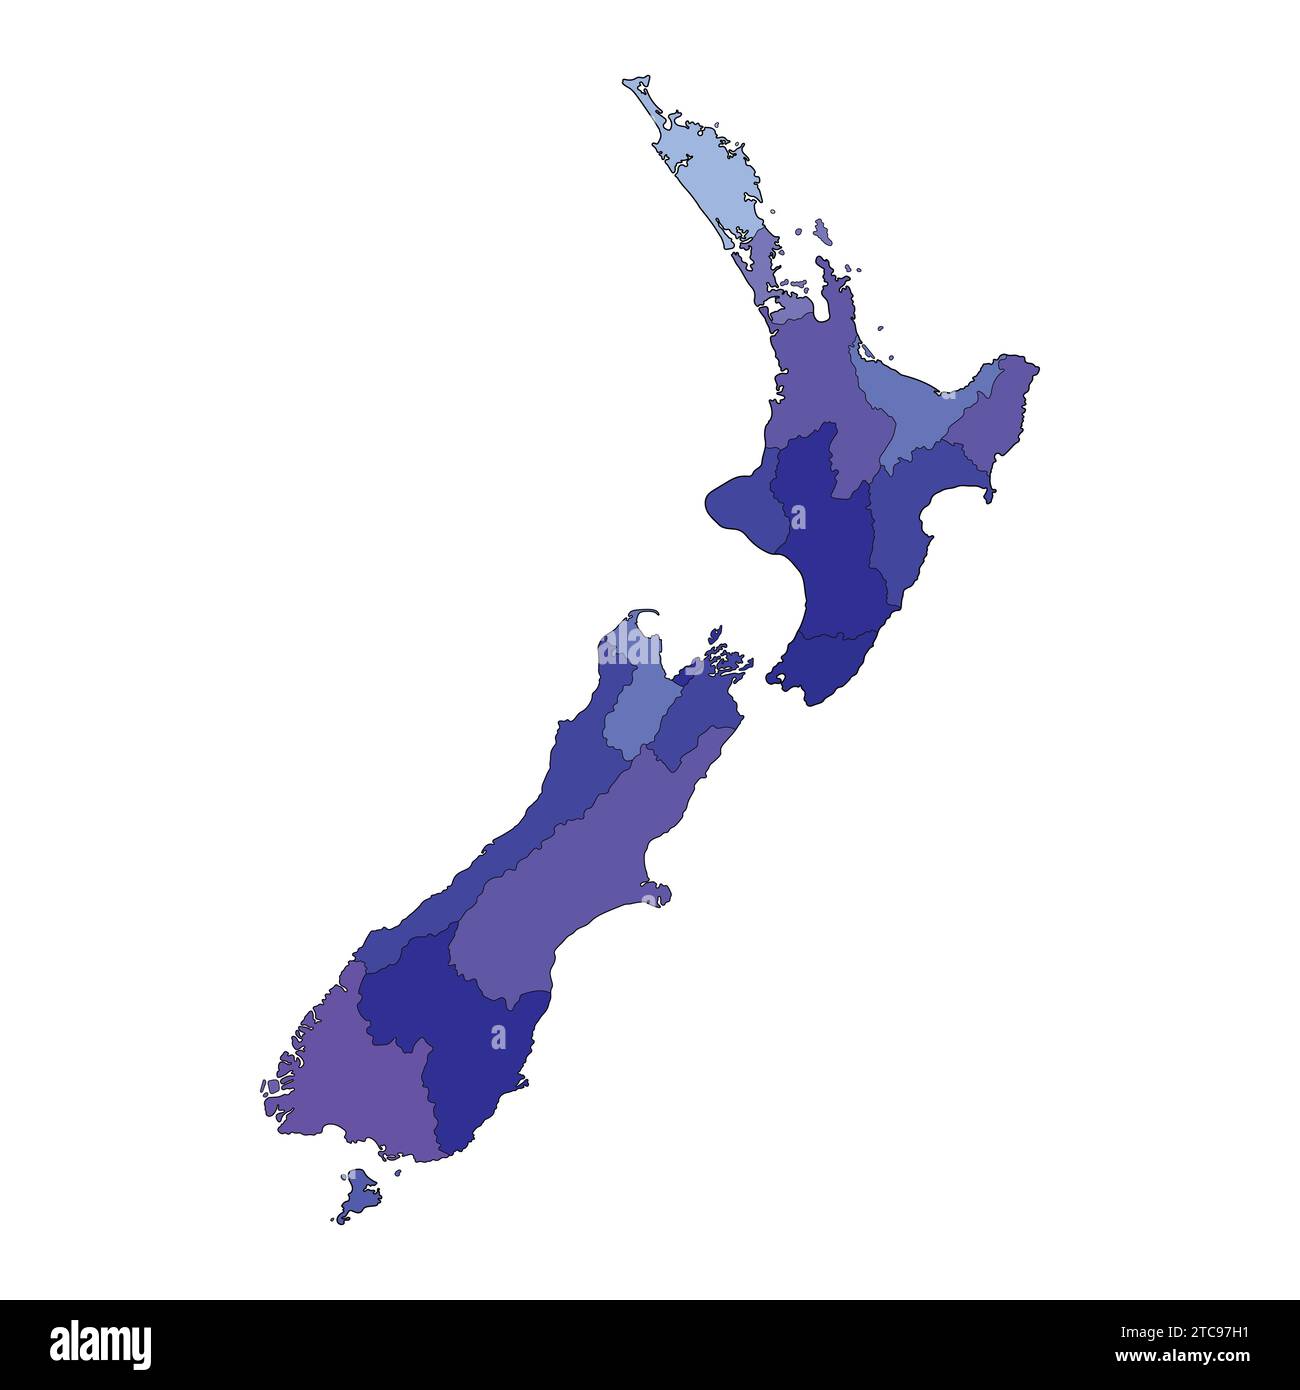 Detailed Map of New Zealand Vector Icon Illustration New Zealand Map Stock Vector